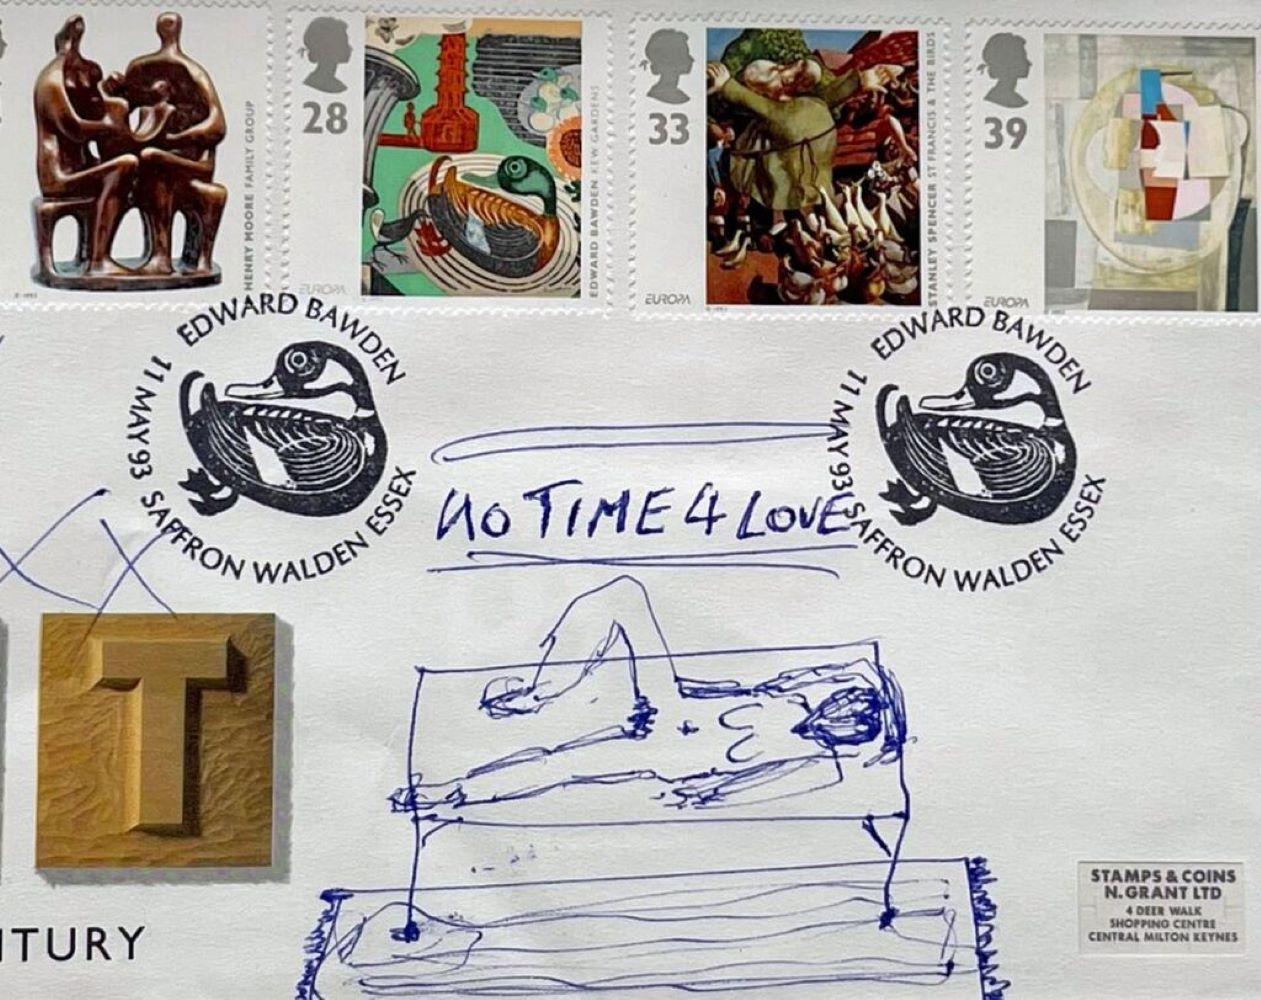 No Time 4 Love, original signed & titled ink drawing on Royal Mail 1st Day Cover - Contemporary Art by Tracey Emin